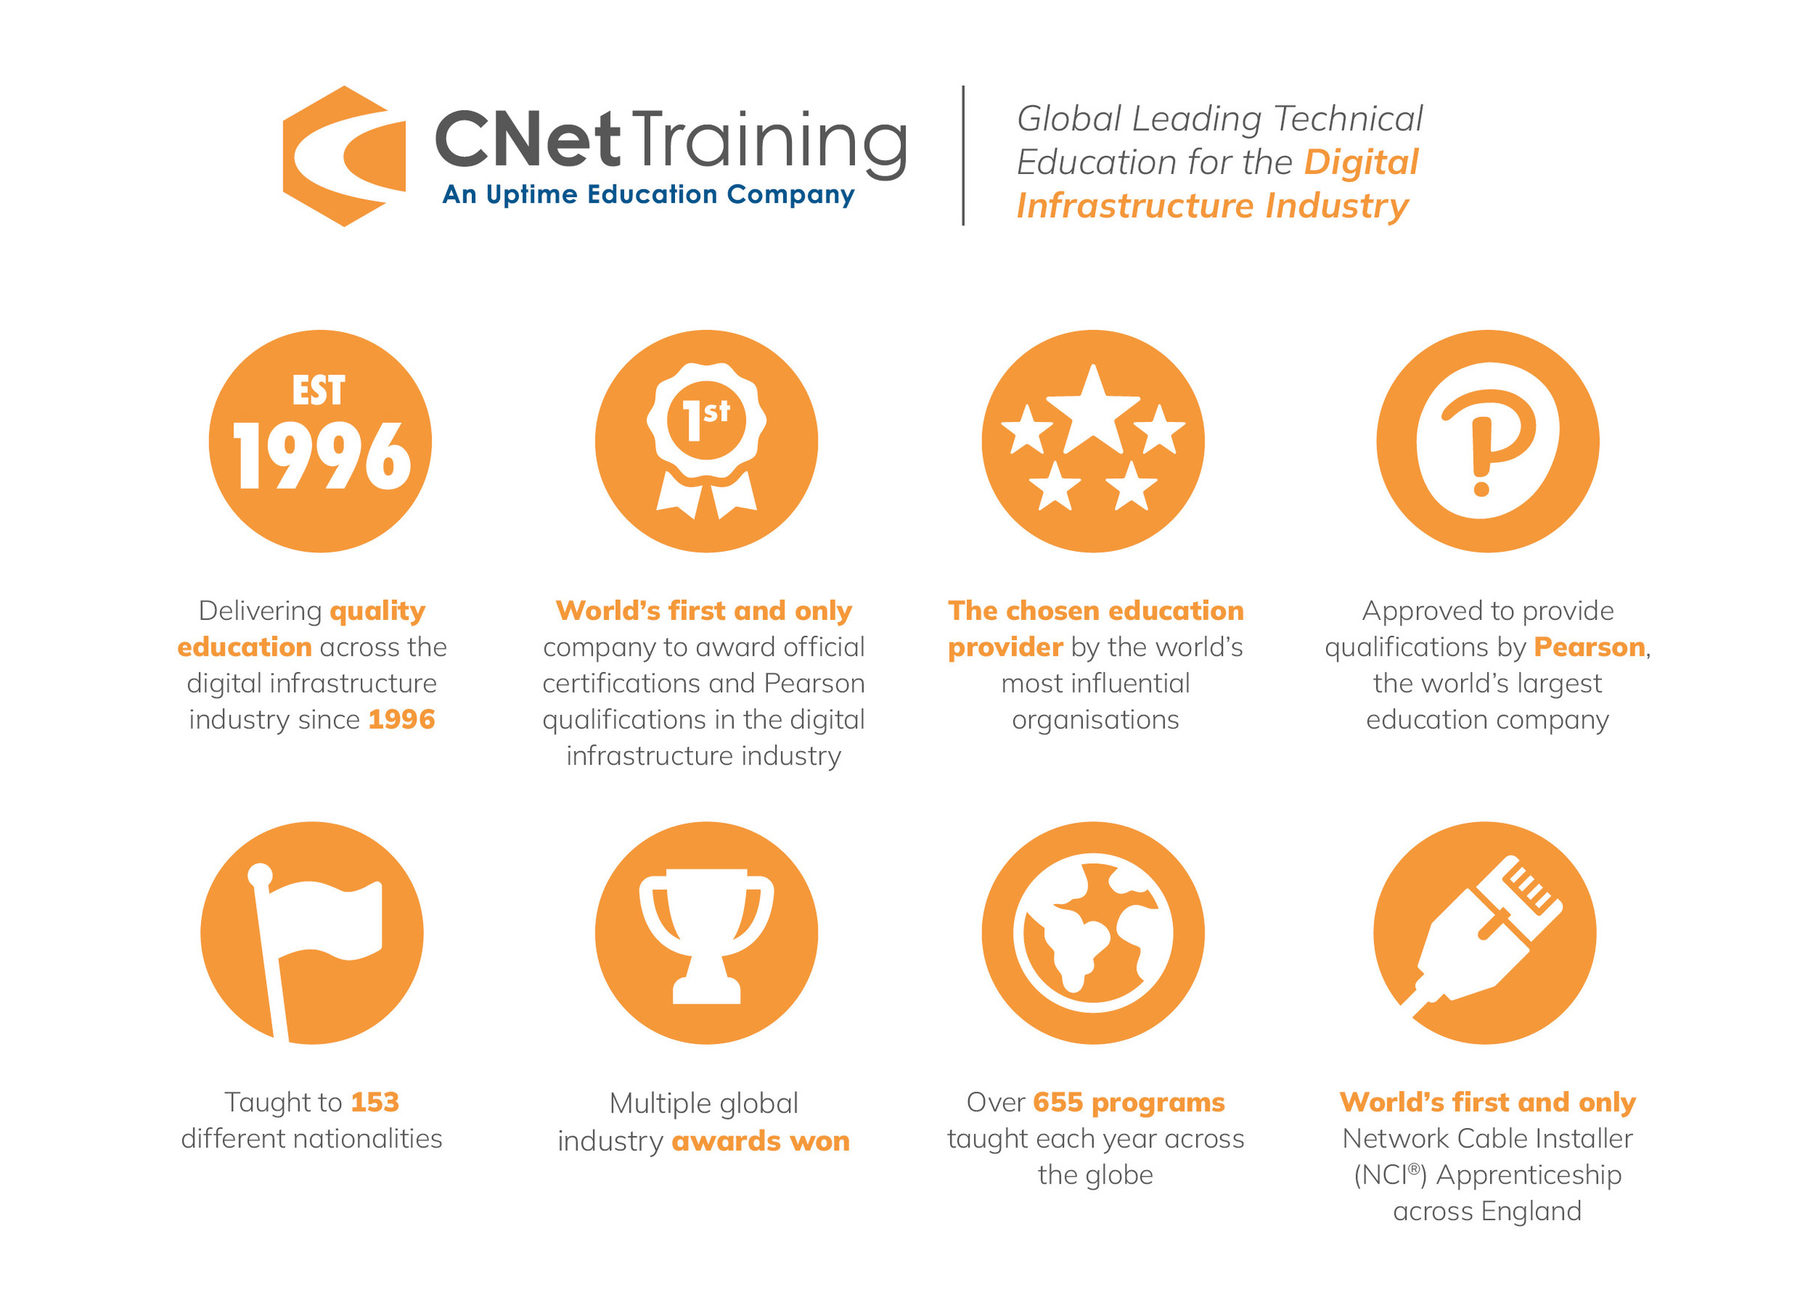 Organisation Image (CNet Training: Fact and figures graphic)